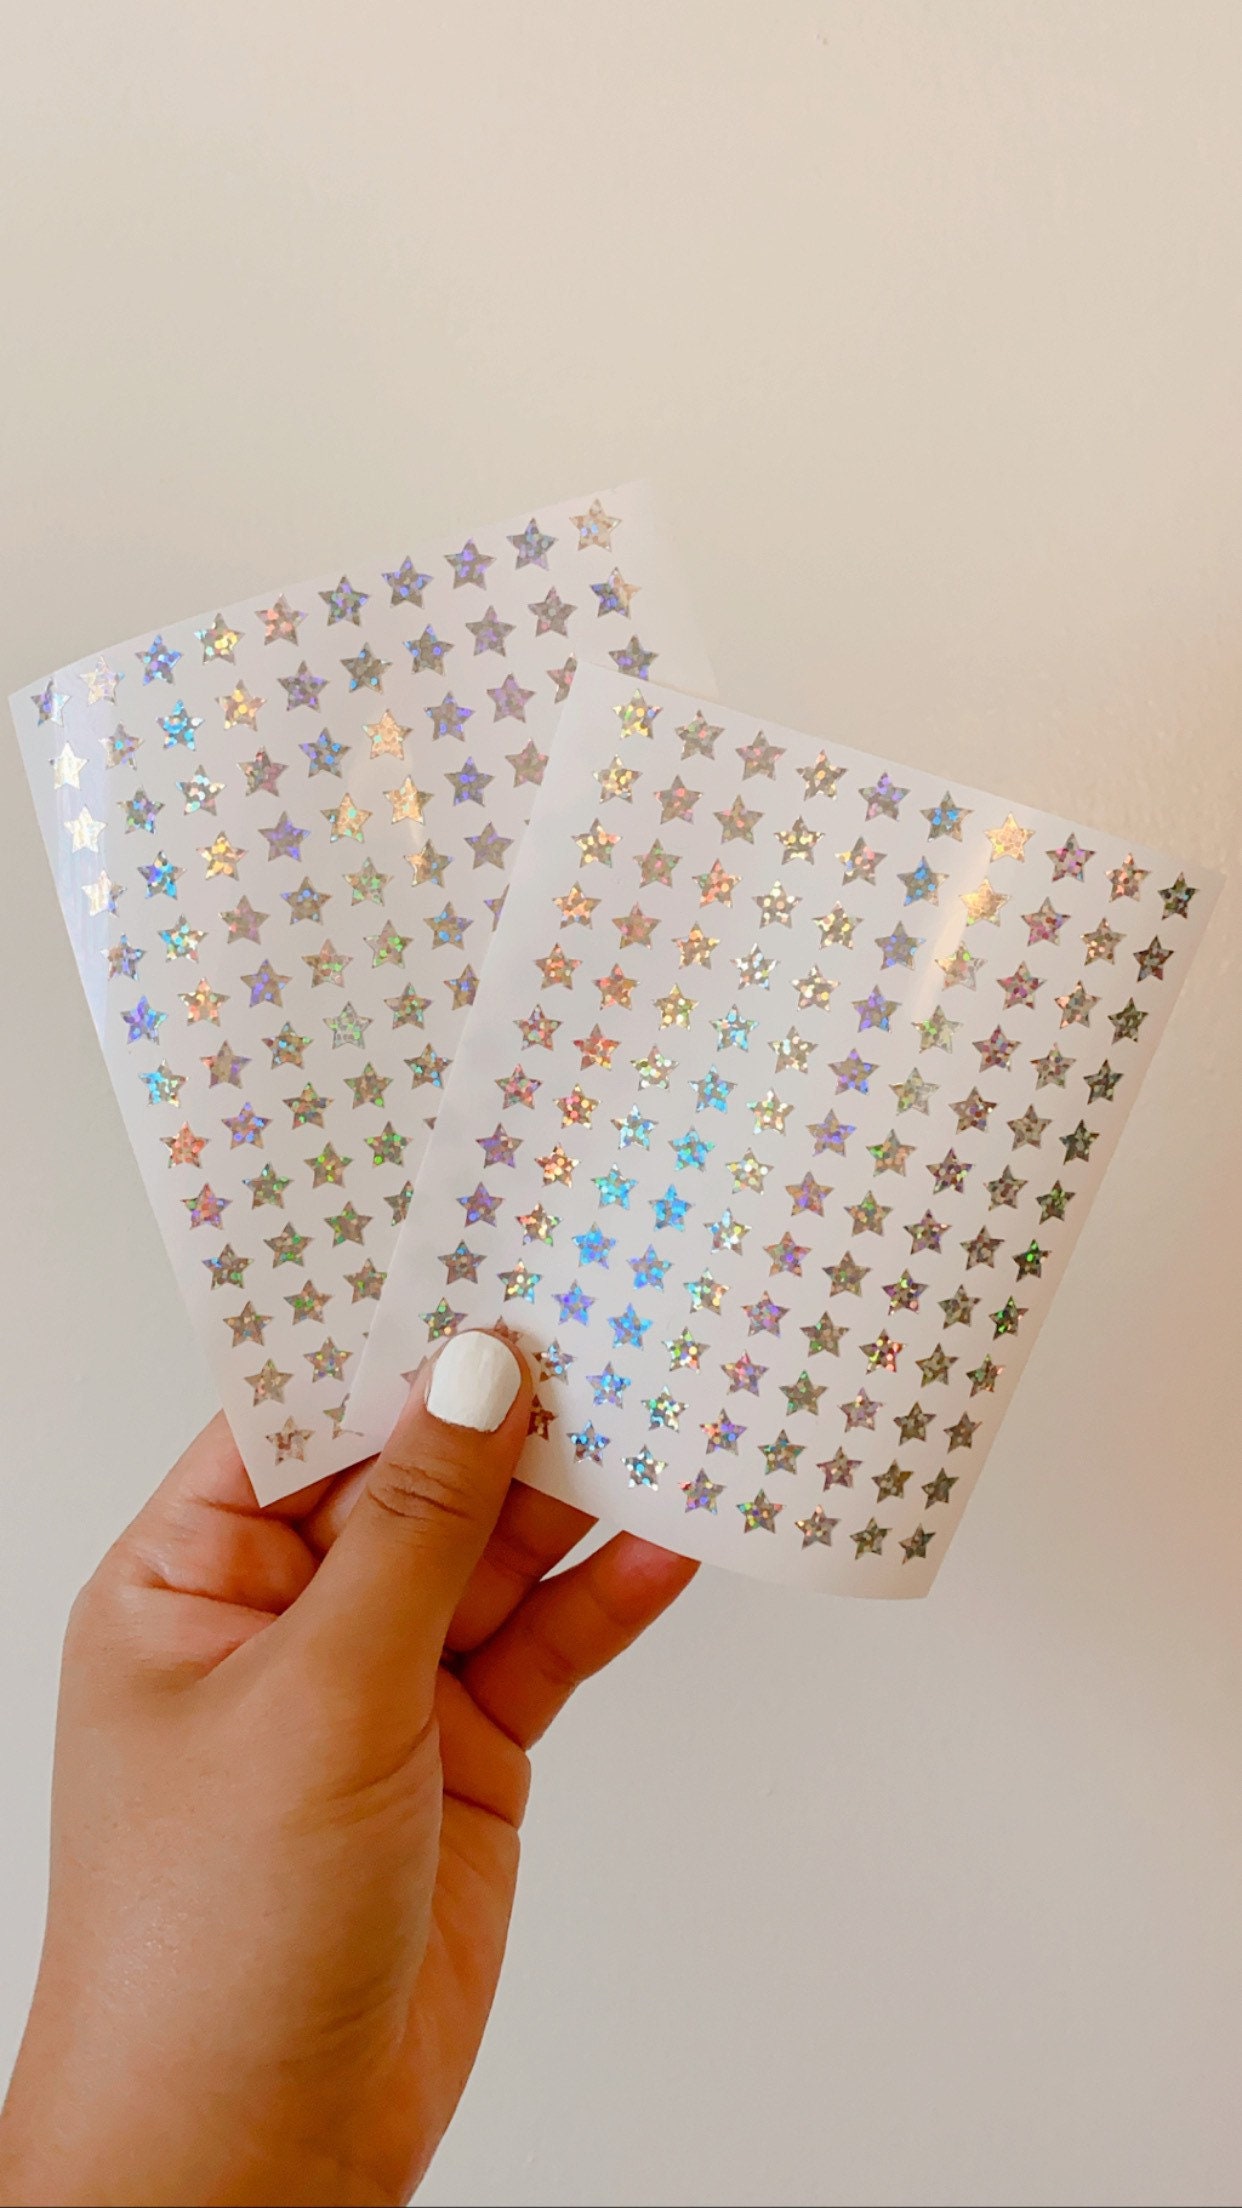 4mm Holographic Star Stickers Tiny Stars Stickers Vinyl Holo 